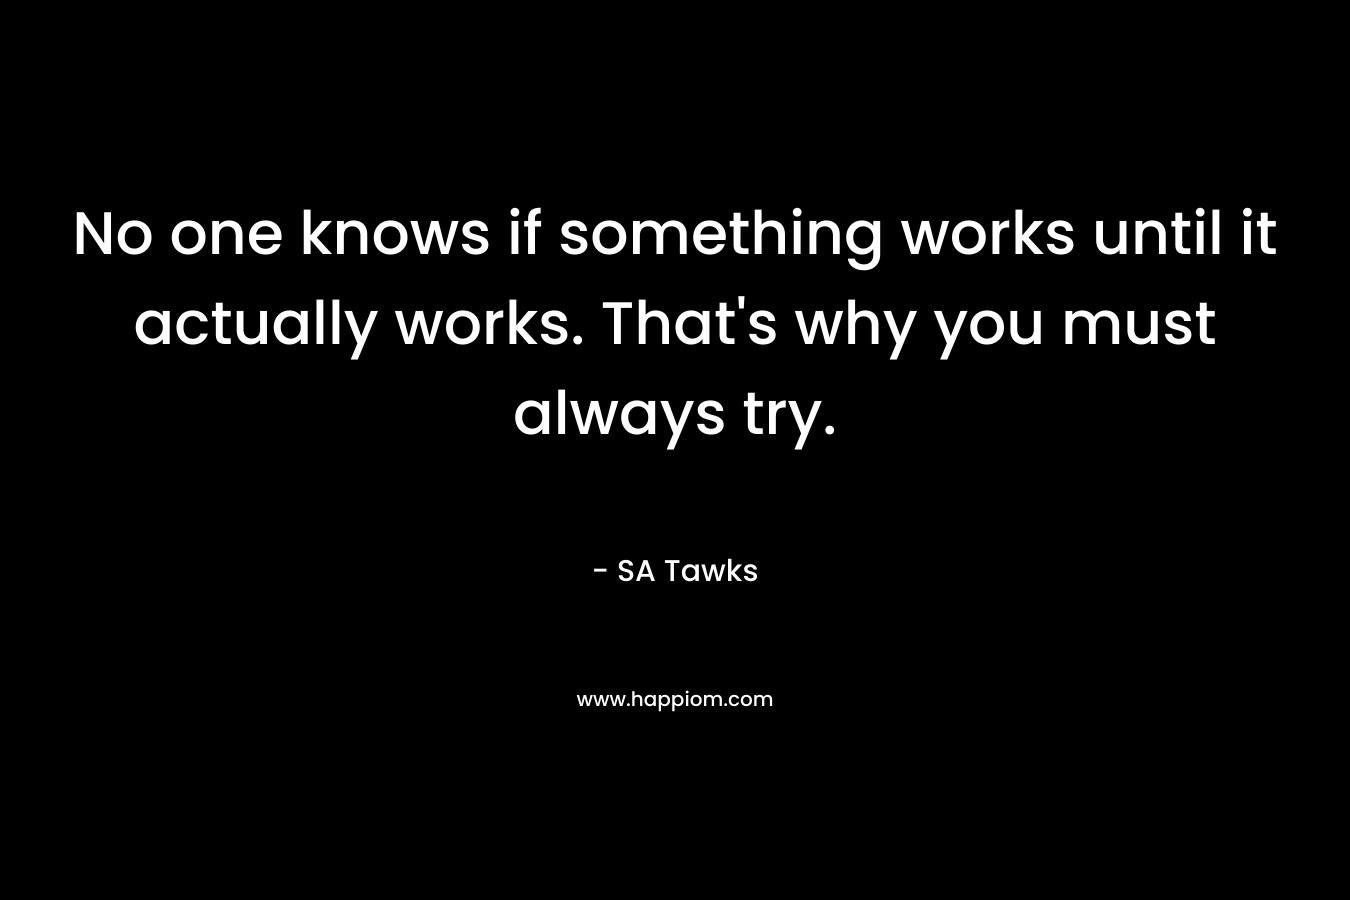 No one knows if something works until it actually works. That's why you must always try.